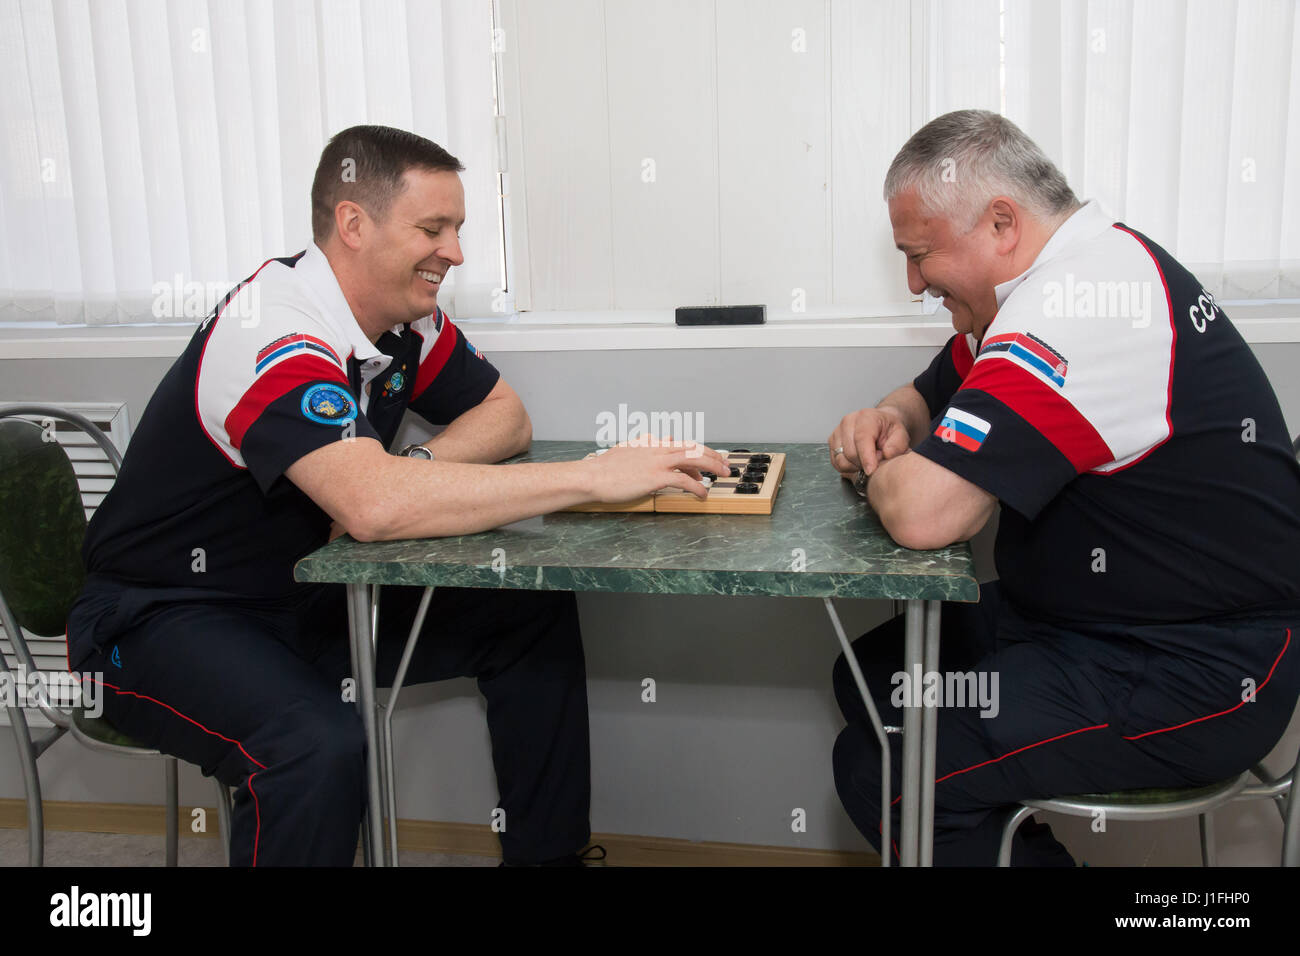 NASA International Space Station Expedition 51 Soyuz MS-04 mission prime crew members American astronaut Jack Fischer (left) and Russian cosmonaut Fyodor Yurchikhin of Roscosmos play a game of checkers during pre-launch activities at the Cosmonaut Hotel April 13, 2017 in Baikonur, Kazakhstan.      (photo by Victor Zelentsov /NASA   via Planetpix) Stock Photo